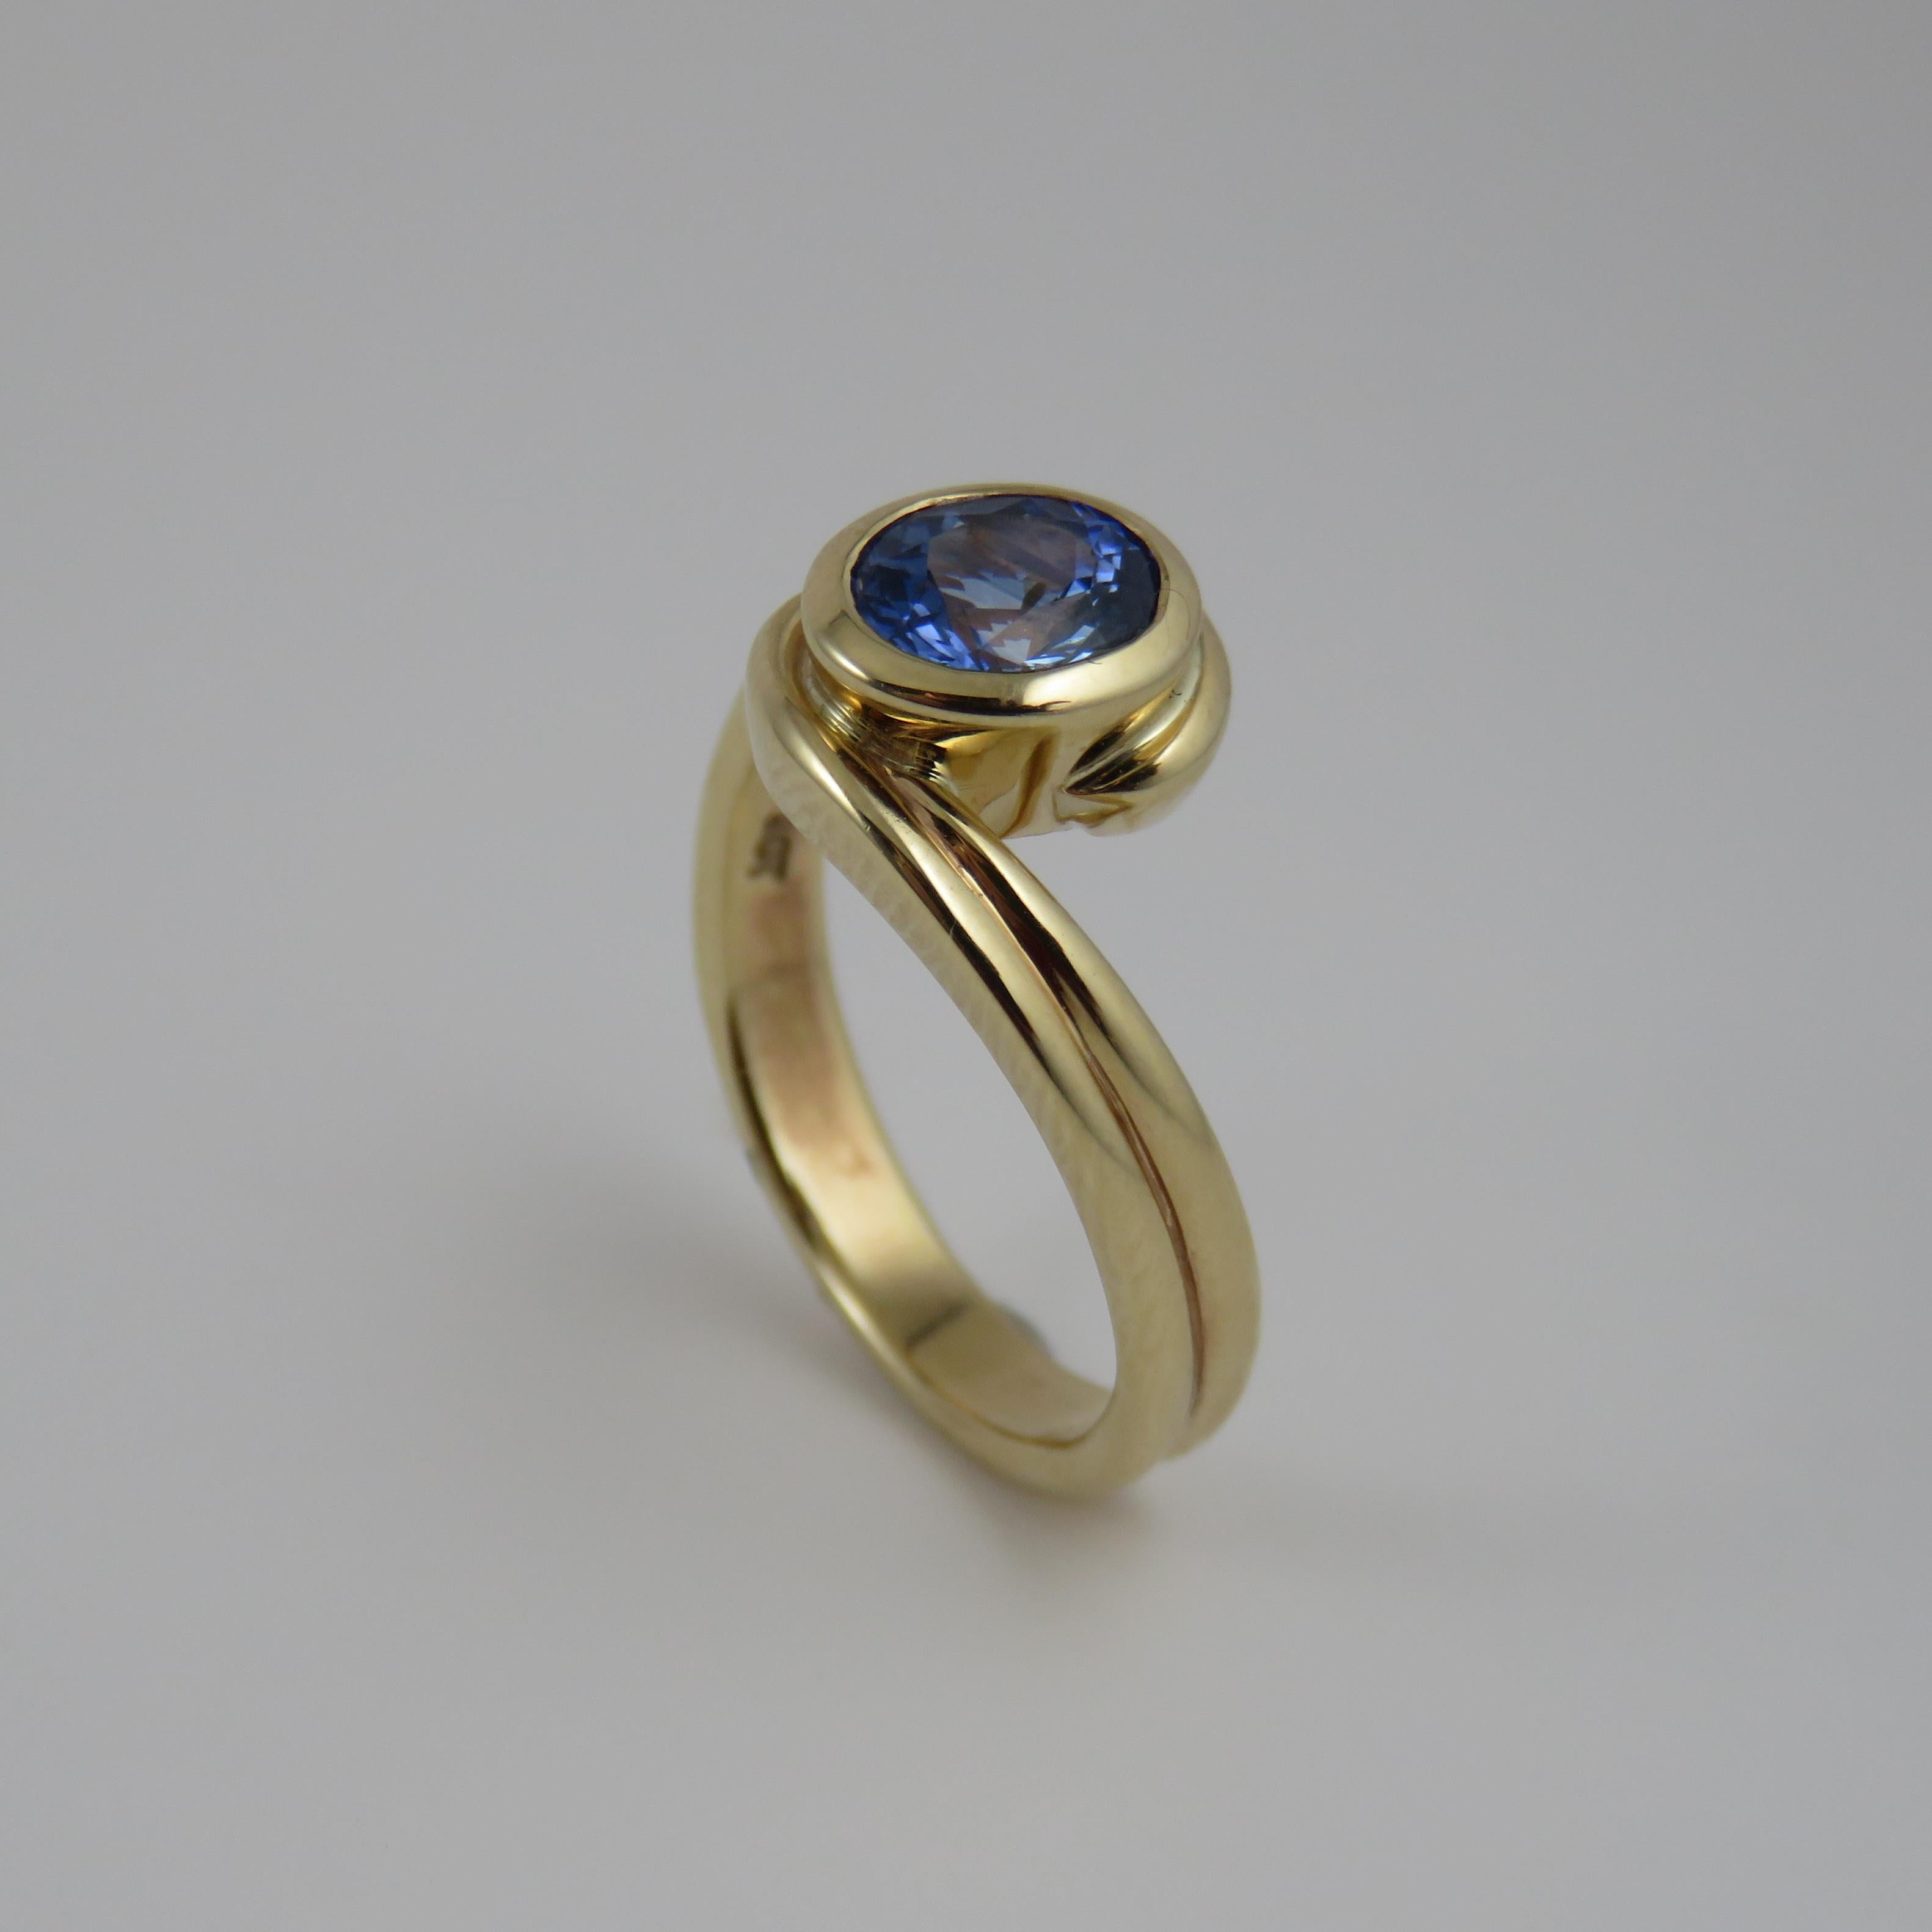 This superb handmade 9k yellow gold sapphire ring is both durable and visually appealing. Its bypass style gives it a distinctive and elegant look, while the oval-shaped blue sapphire stone serves as its centerpiece. The stone is securely held in